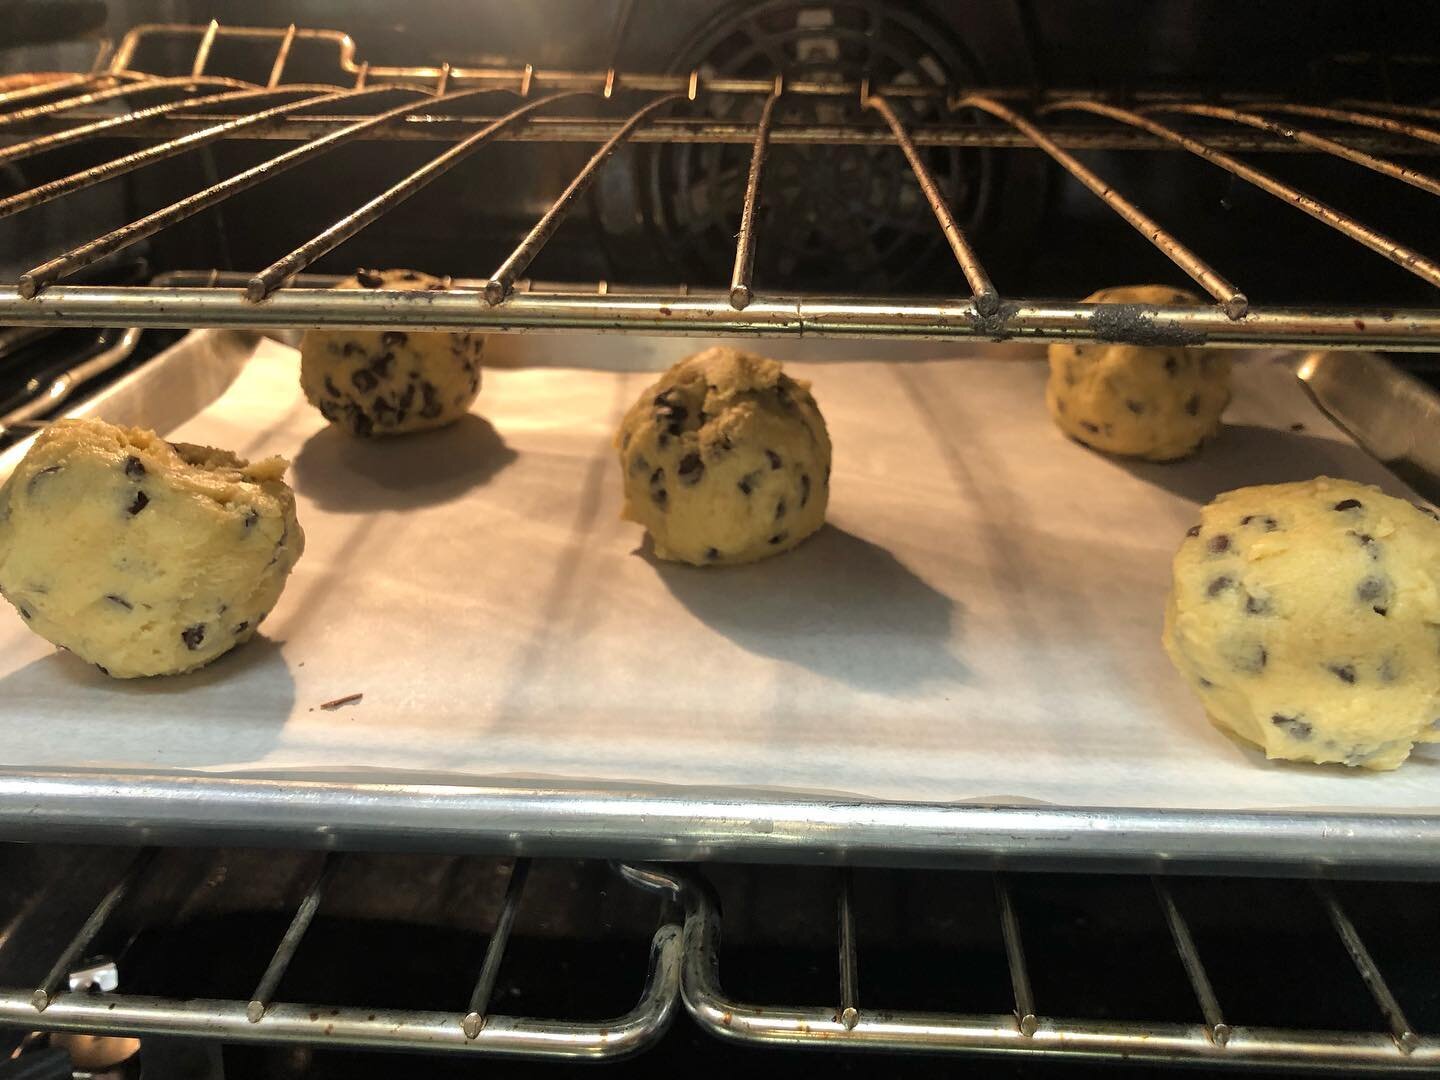 #thebestcookies are in the oven! #readyin20mins #giantchocolatechipcookie